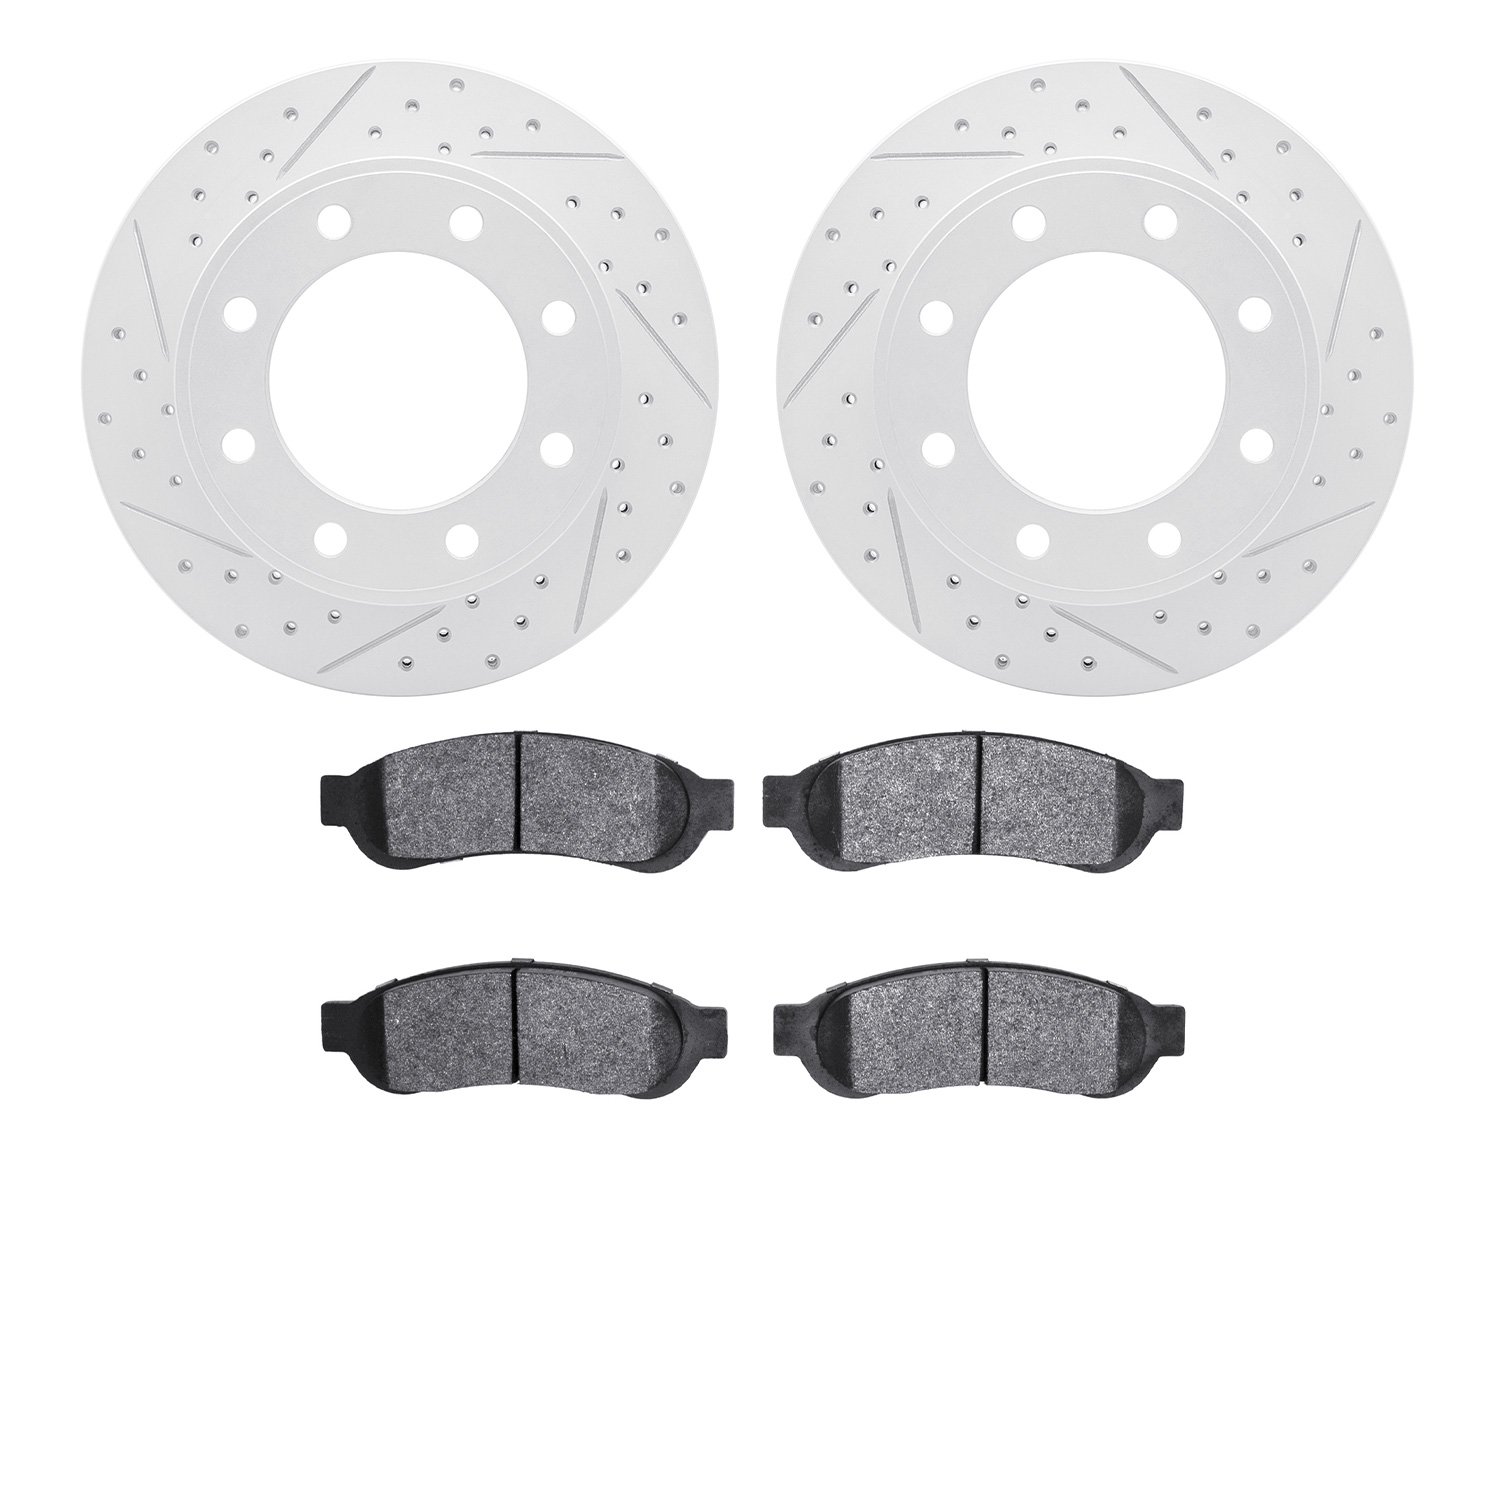 2502-54178 Geoperformance Drilled/Slotted Rotors w/5000 Advanced Brake Pads Kit, 2006-2010 Ford/Lincoln/Mercury/Mazda, Position: